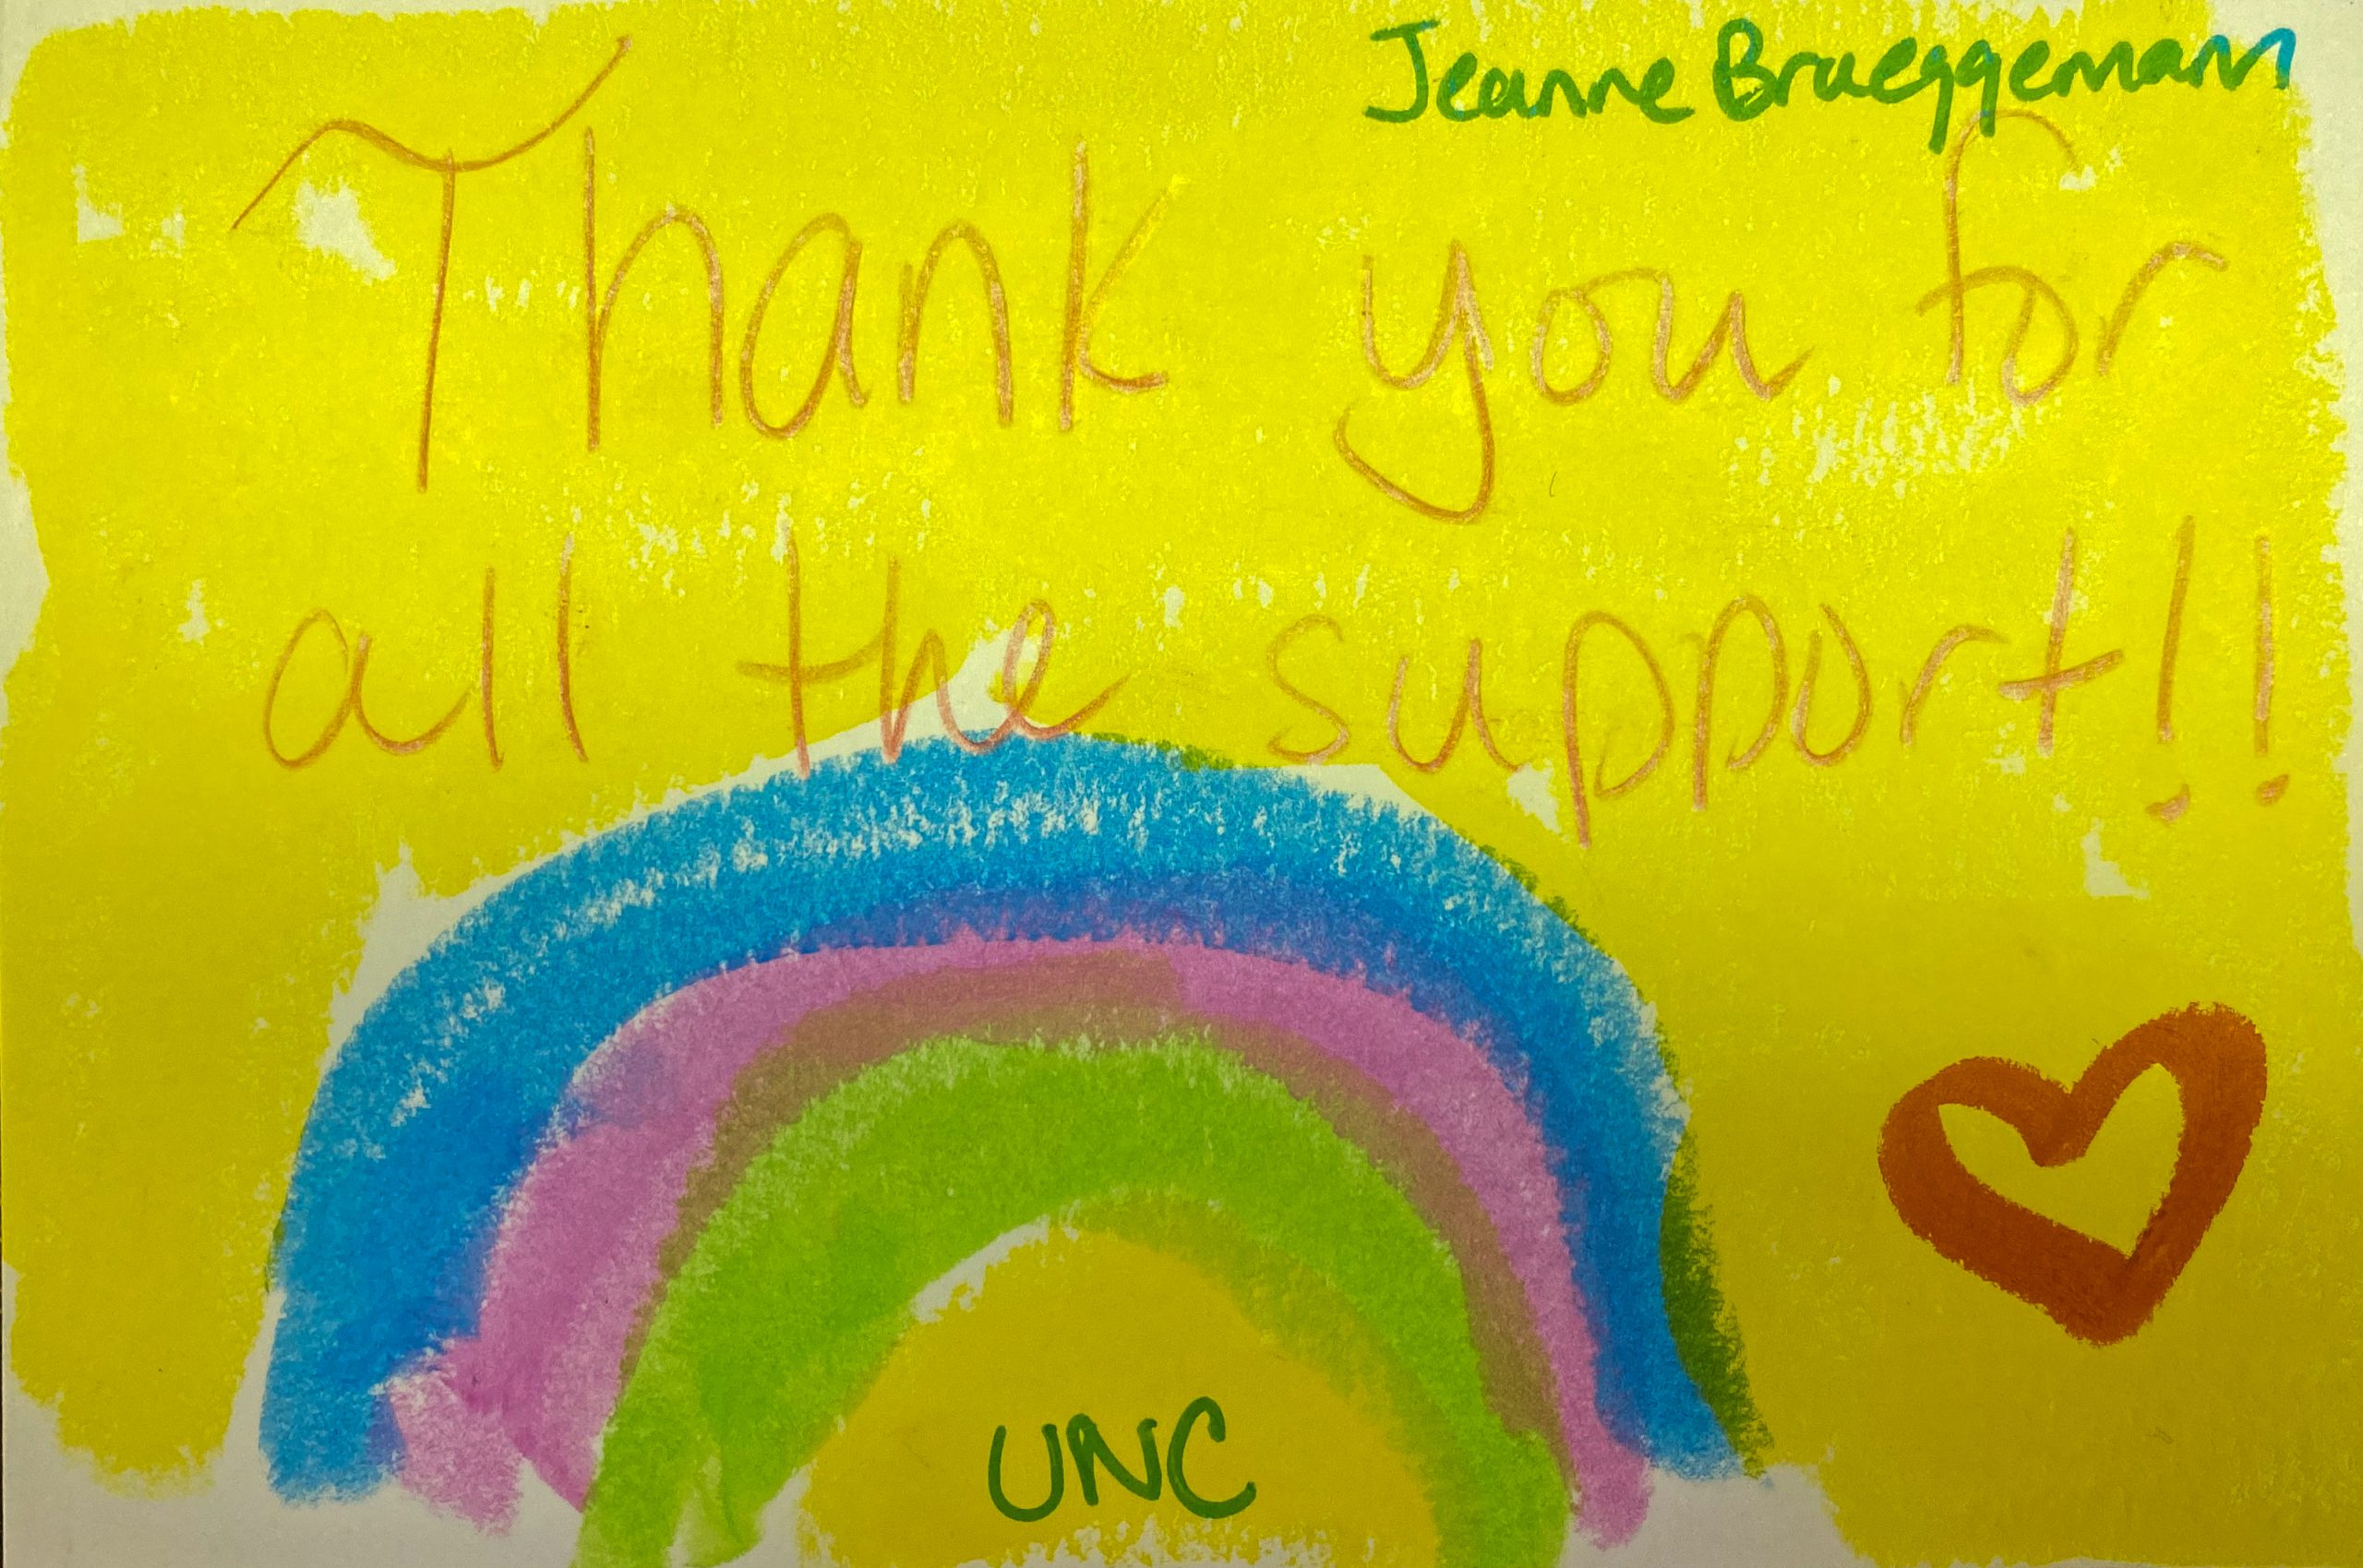 handpainted yellow postcard with a rainbow and text: Thank you for all the support, Jeanne Brueggemann